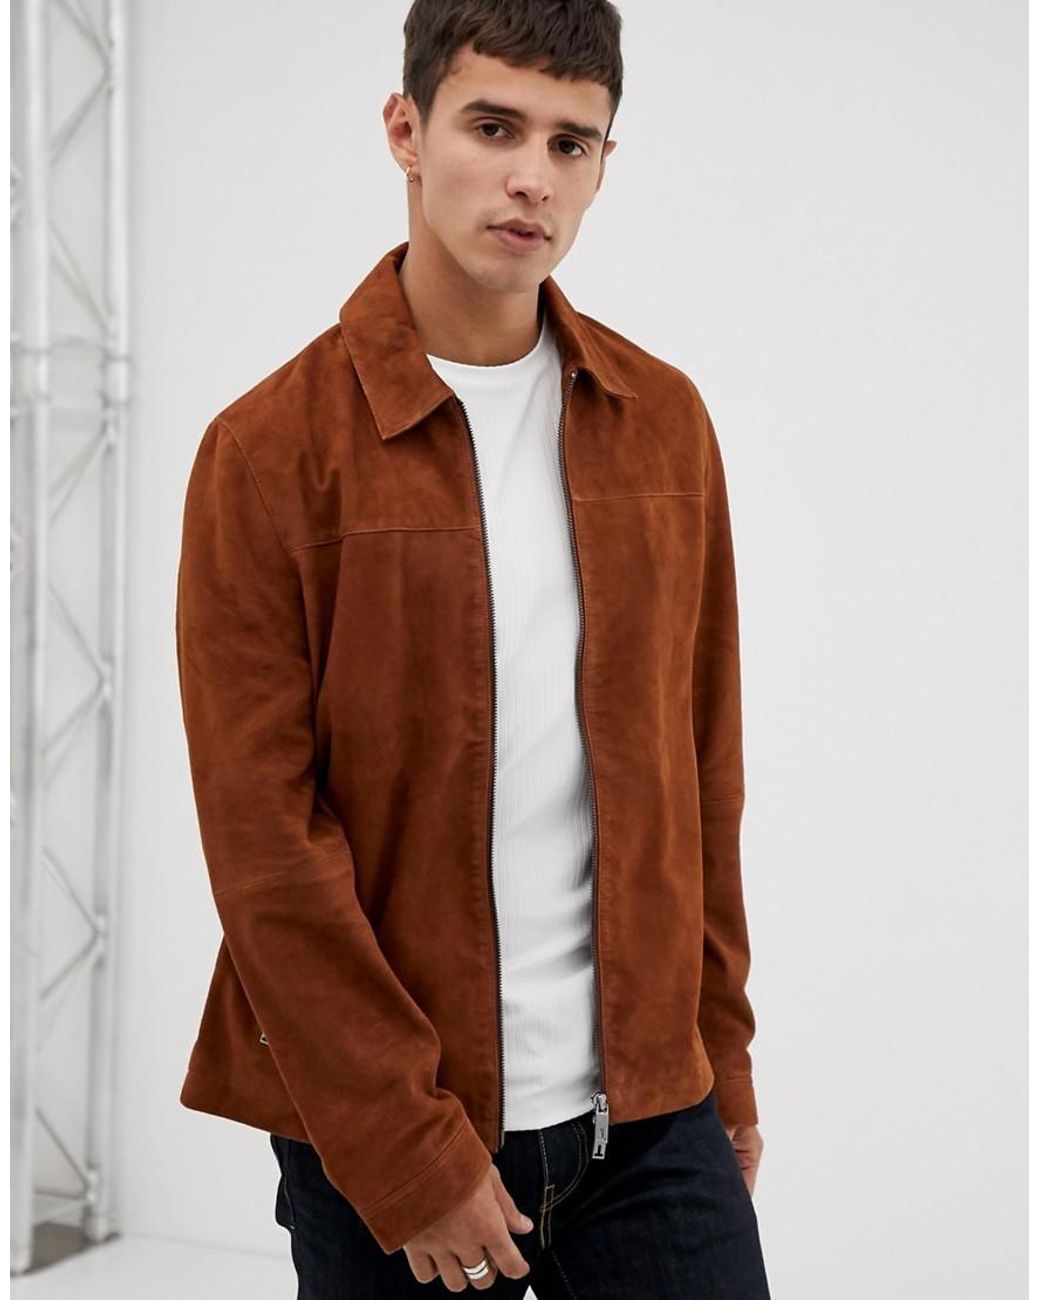 Ted Baker Suede Jacket In Brown for Men - Save 14% - Lyst